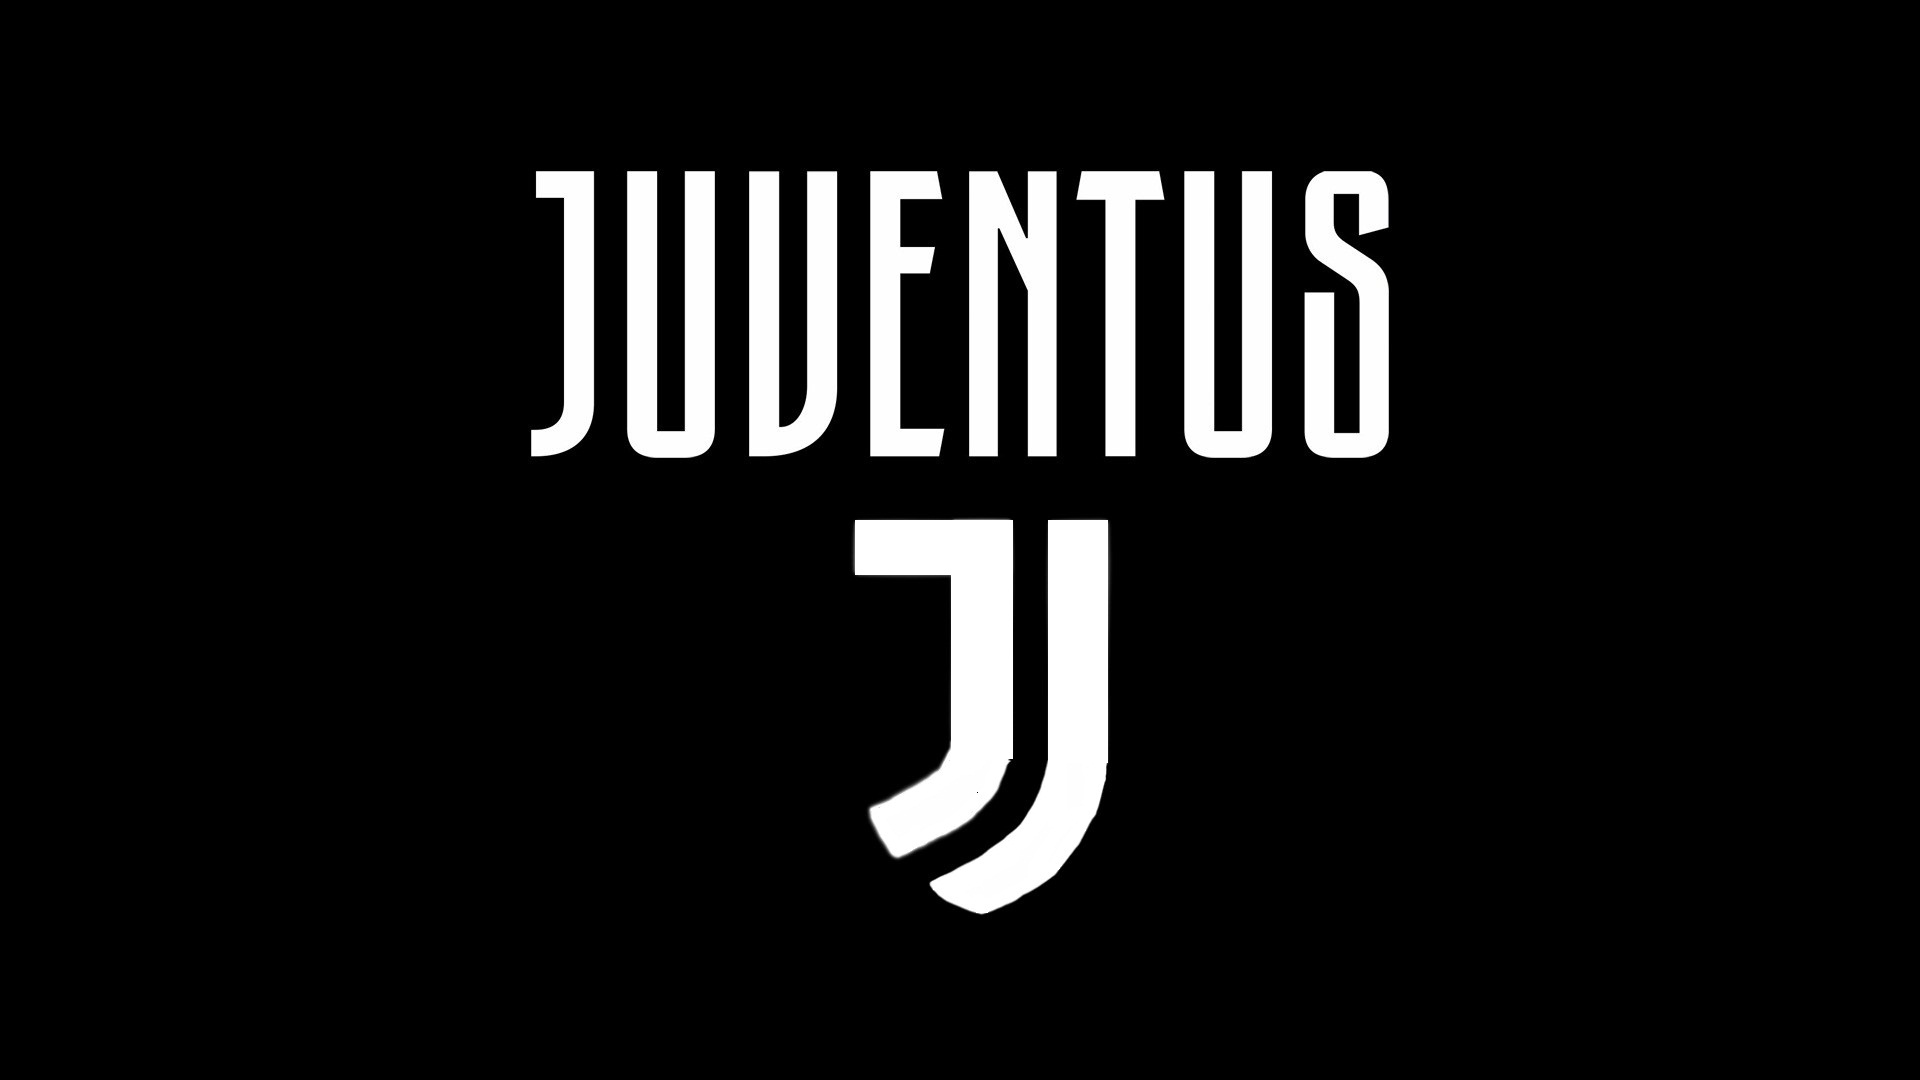 Juventus FC Desktop Wallpapers With Resolution 1920X1080 pixel. You can make this wallpaper for your Mac or Windows Desktop Background, iPhone, Android or Tablet and another Smartphone device for free